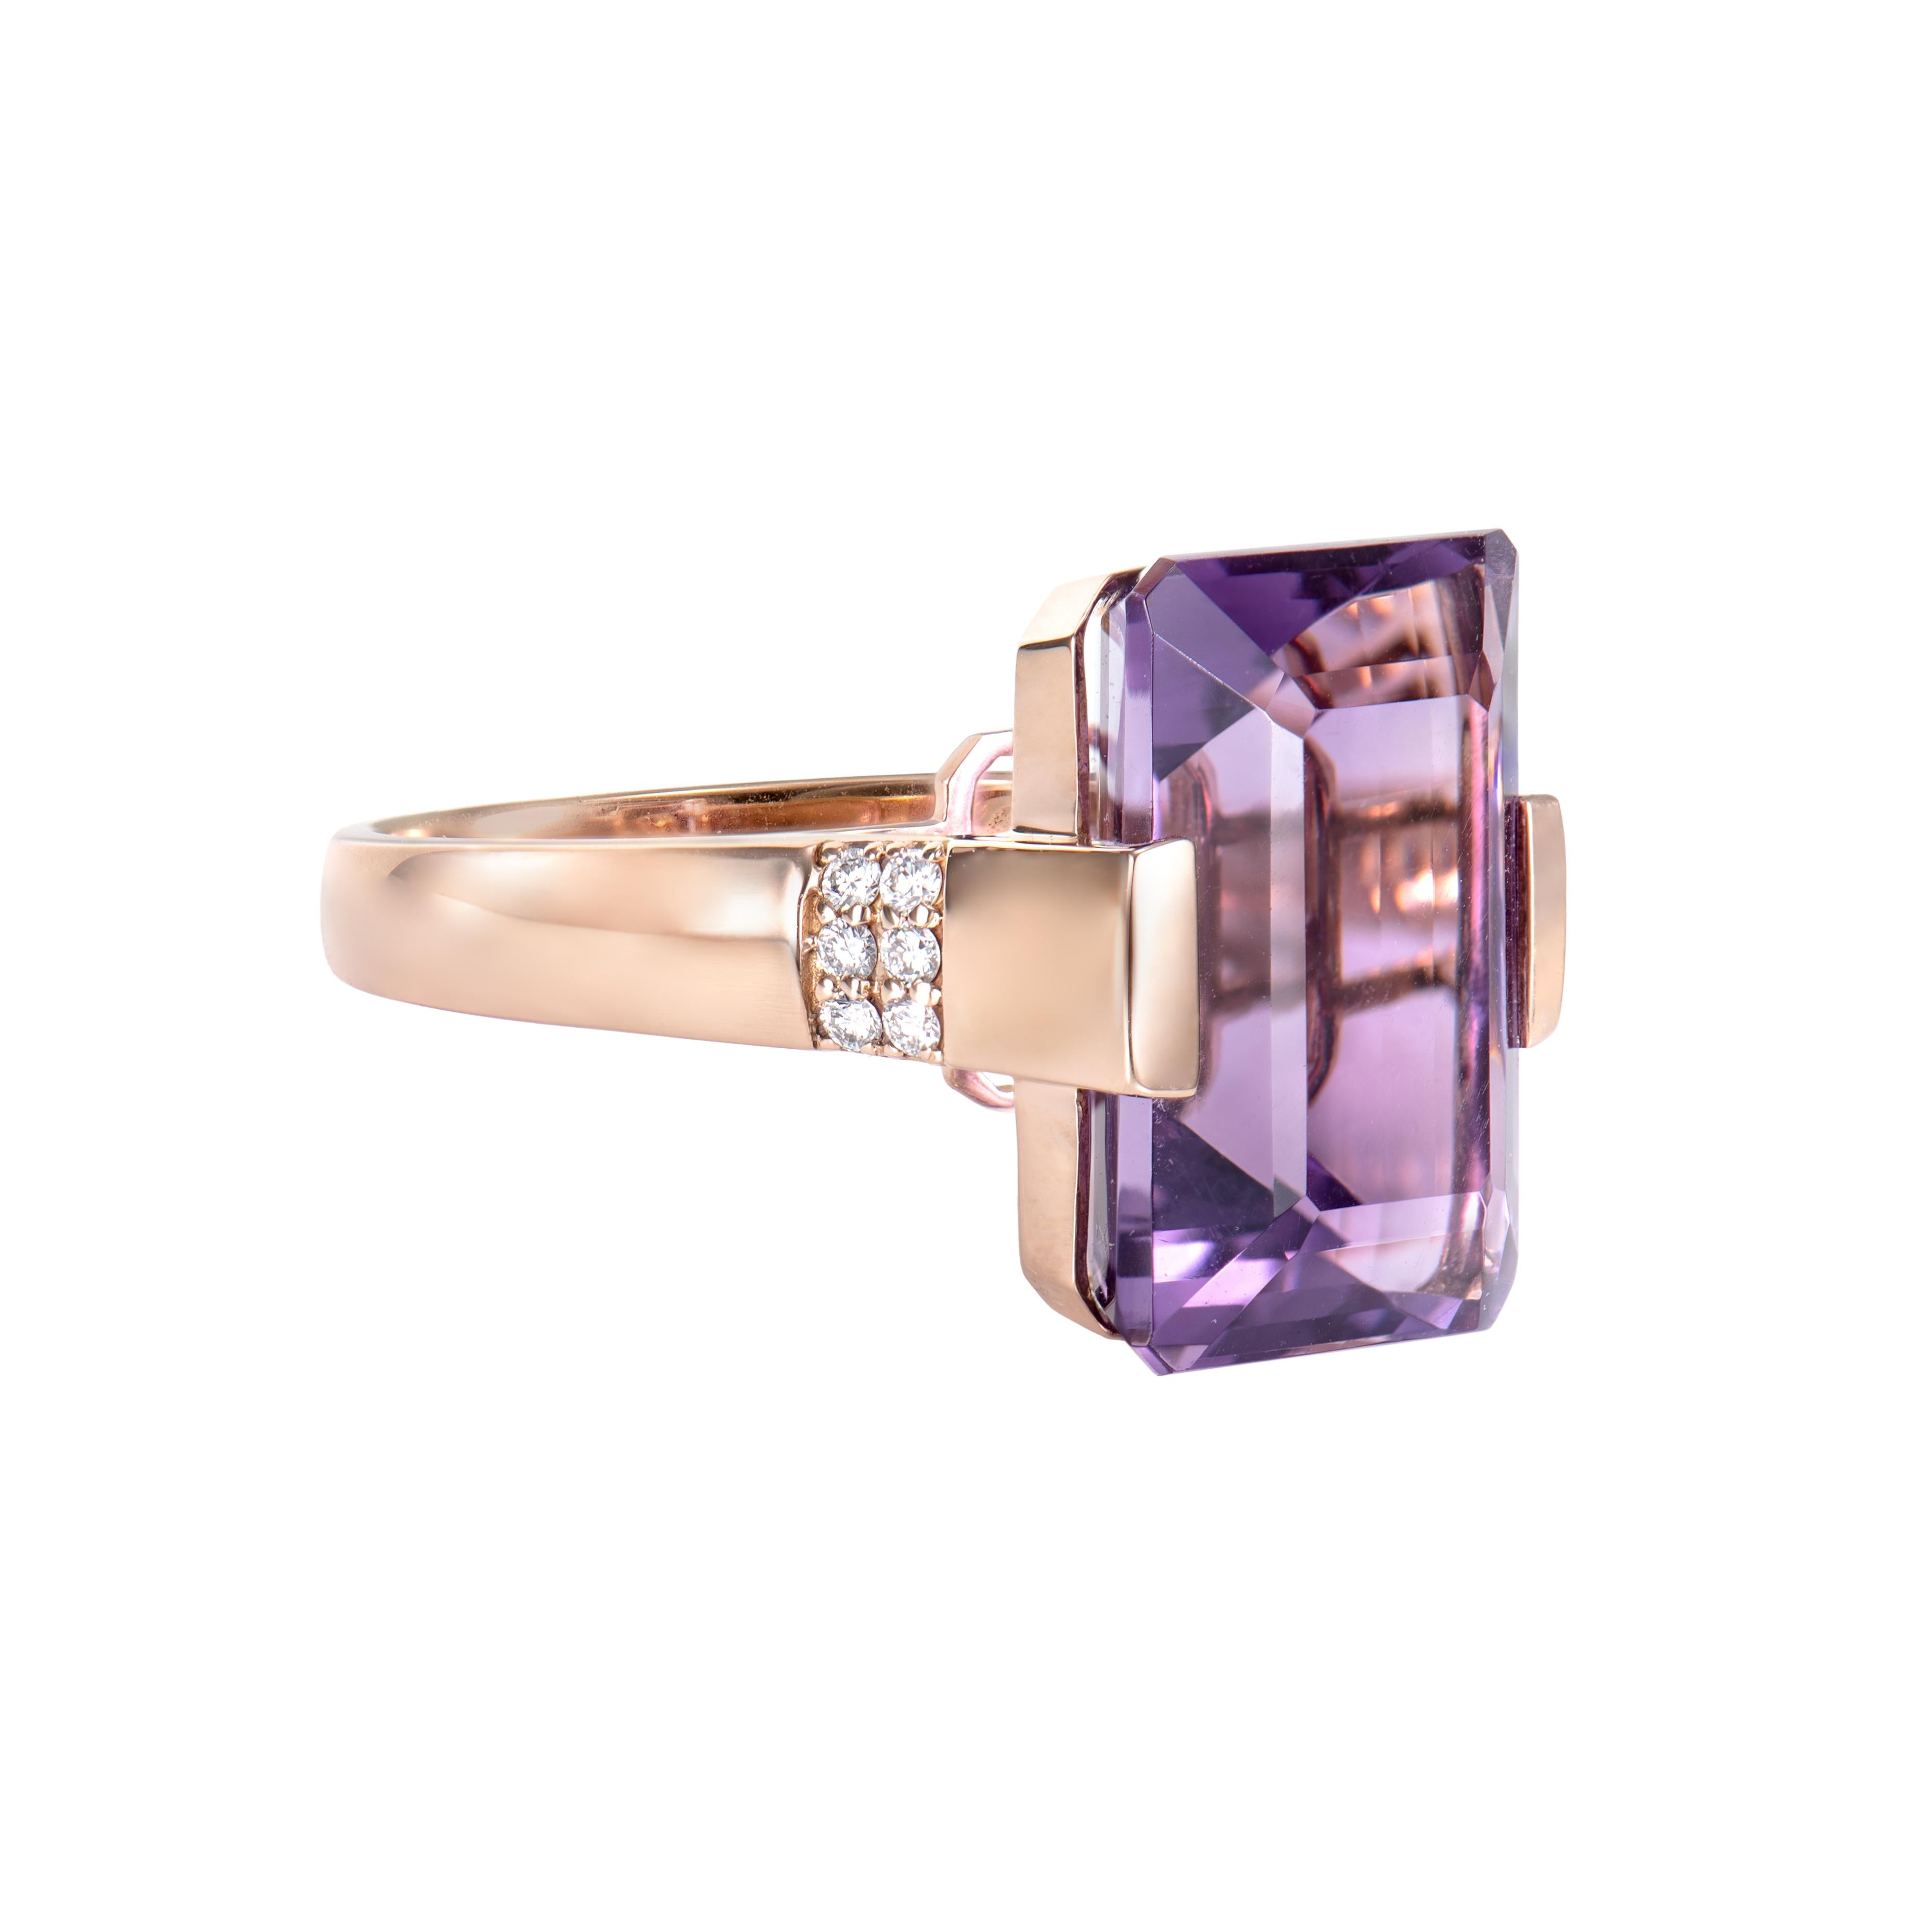 This is fancy Amethyst Ring in Octagon shape with purple hue. Amethysts are particularly known to bring powerful energies to Aquarians or those born in February. In general, it is said to calm and de-stress wearers and alleviate all negativity.